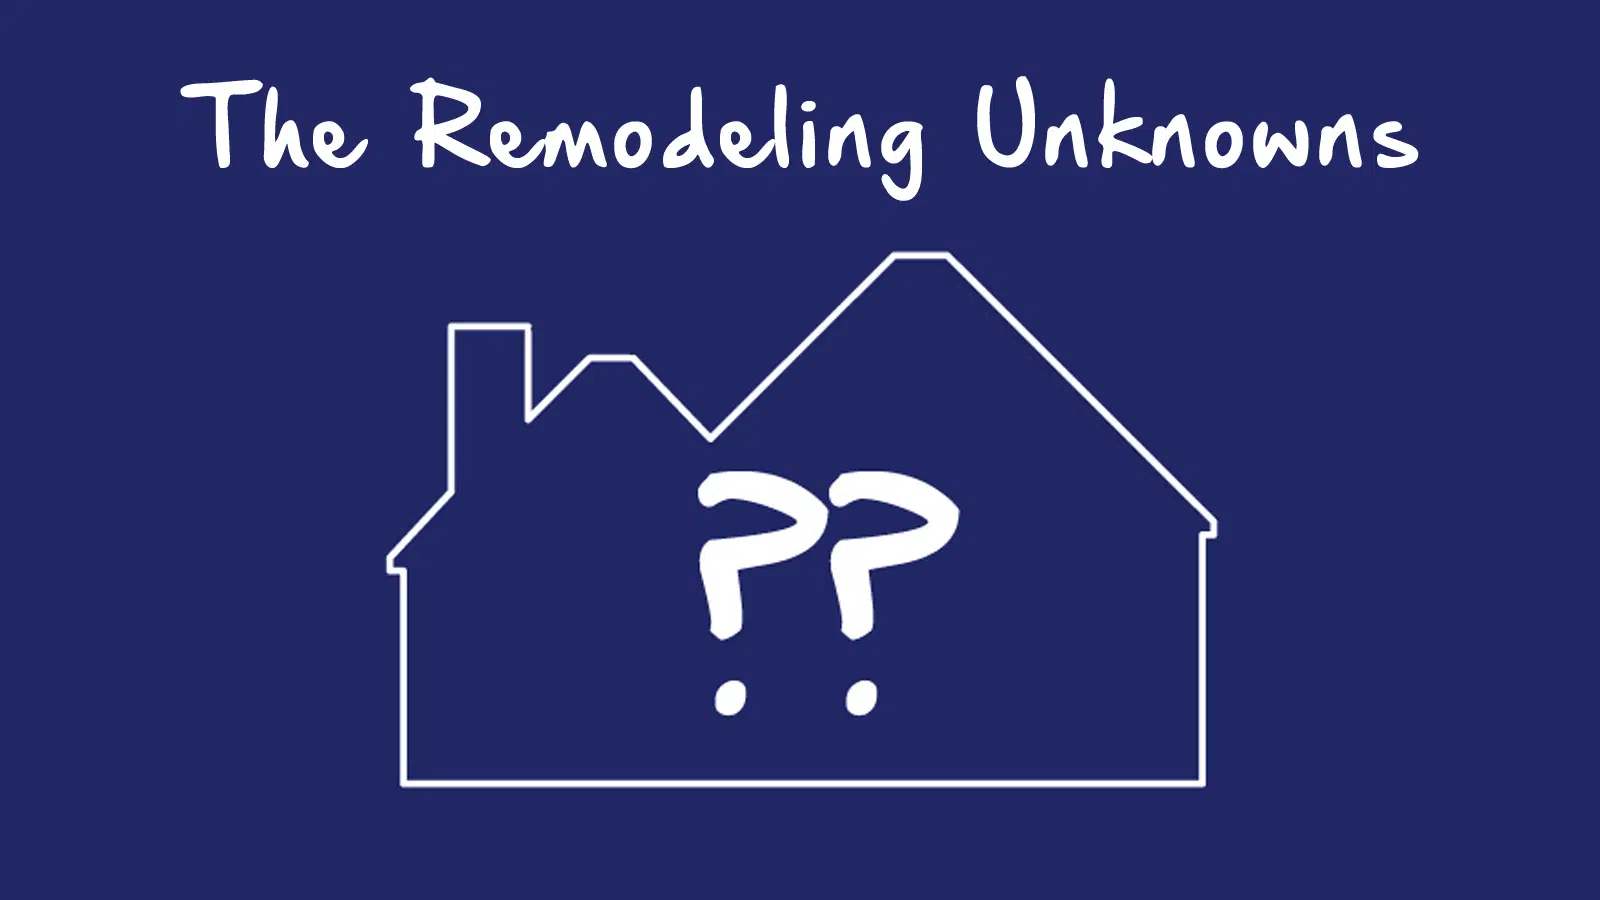 Remodeling Unknowns